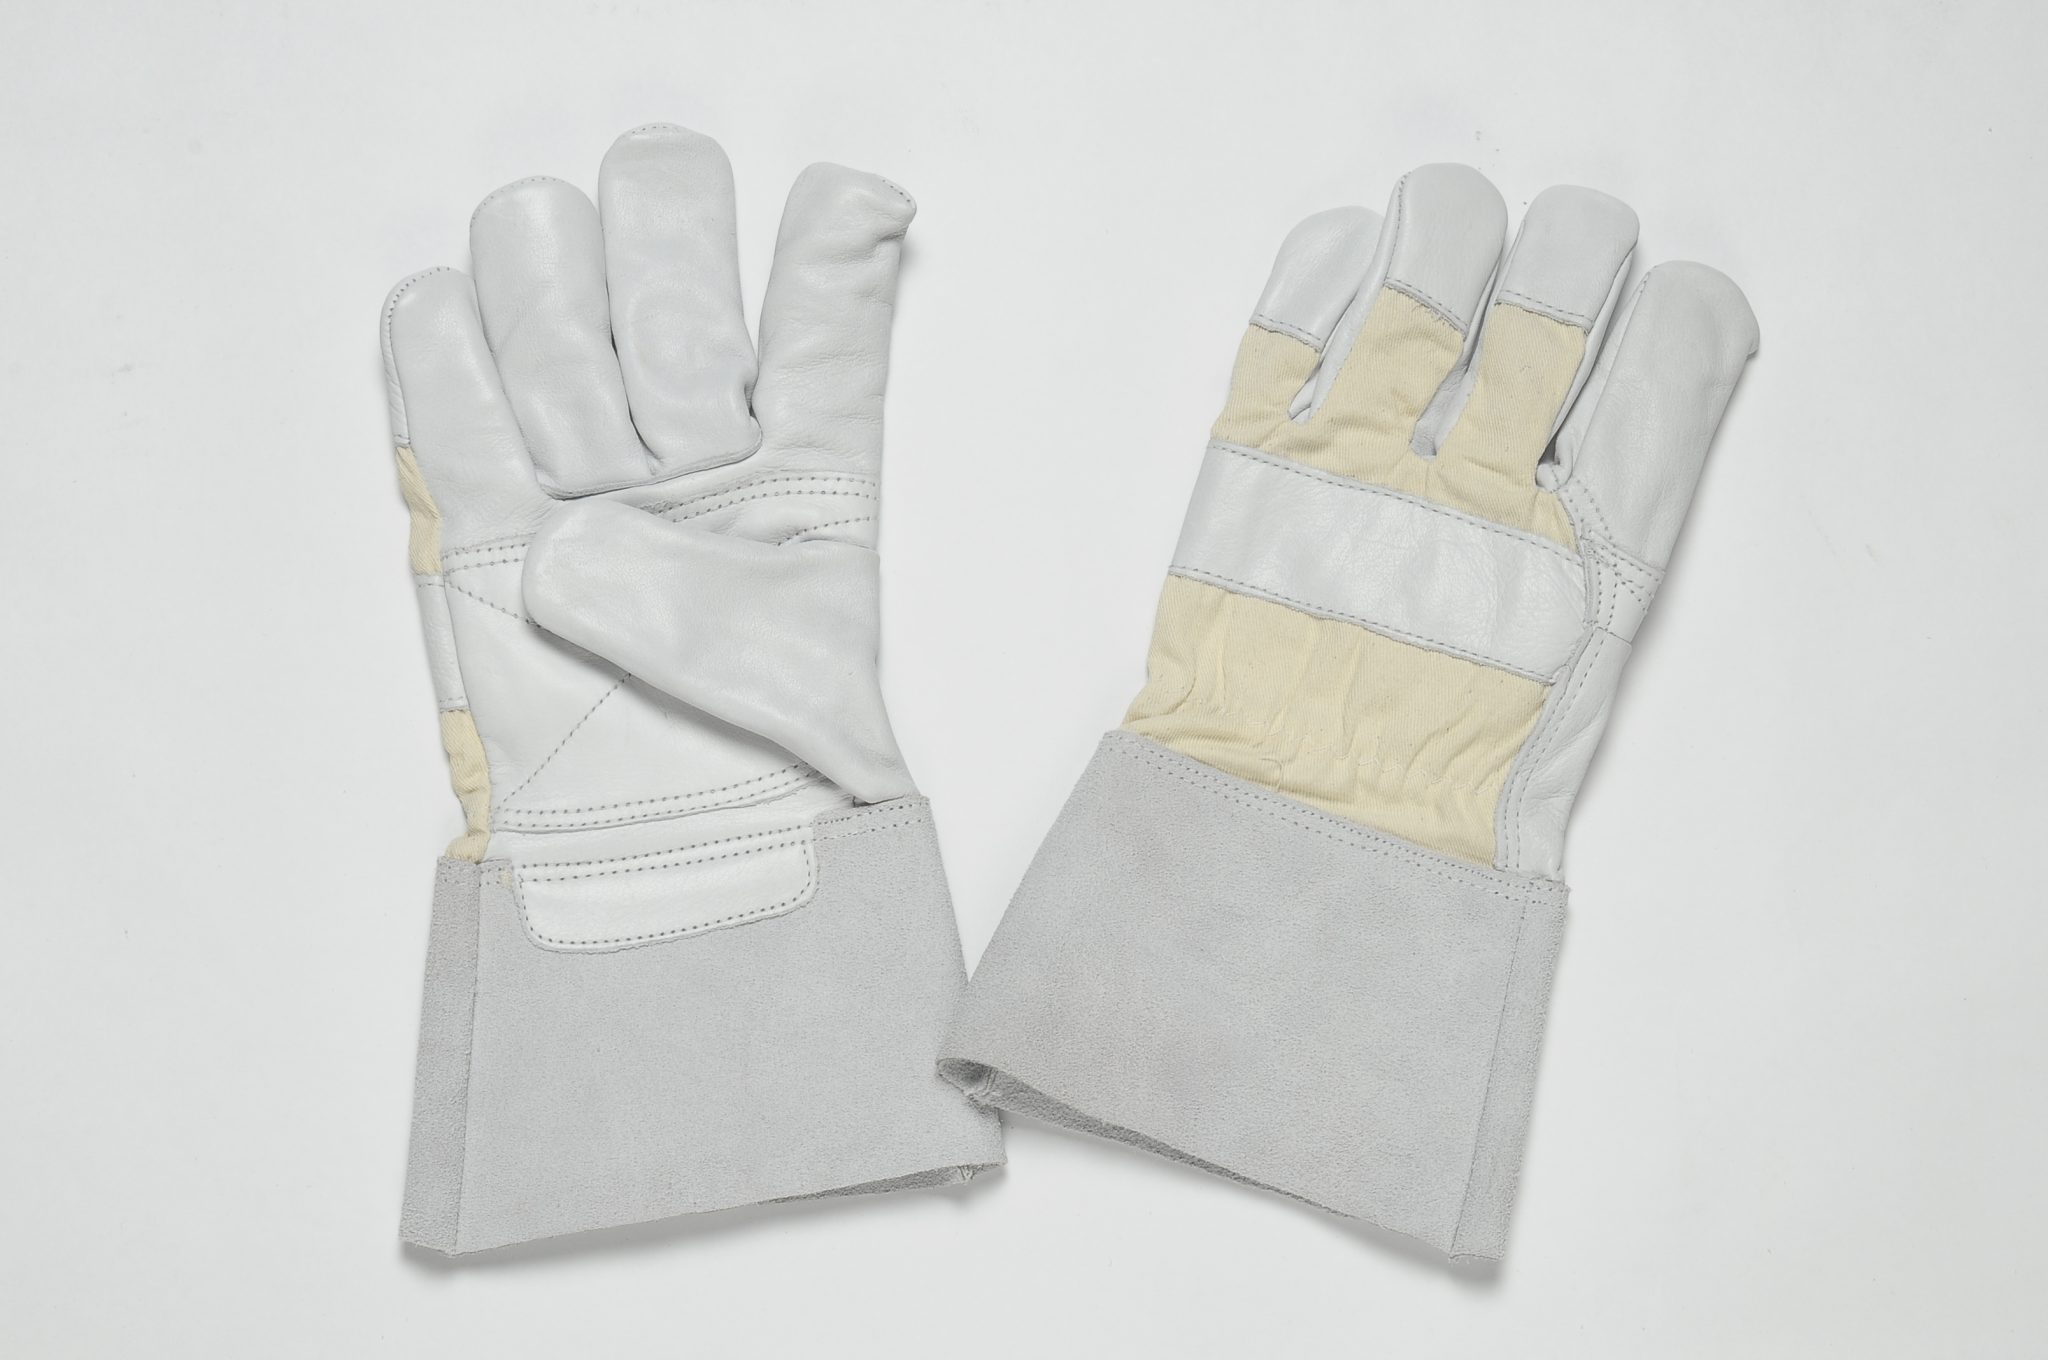 NATURAL GRAIN GLOVES, FLANNEL LINER IN PALM, CUFF OF THE SPLIT, REINFORCEMENT IN THE PALM AND FOREFINGER